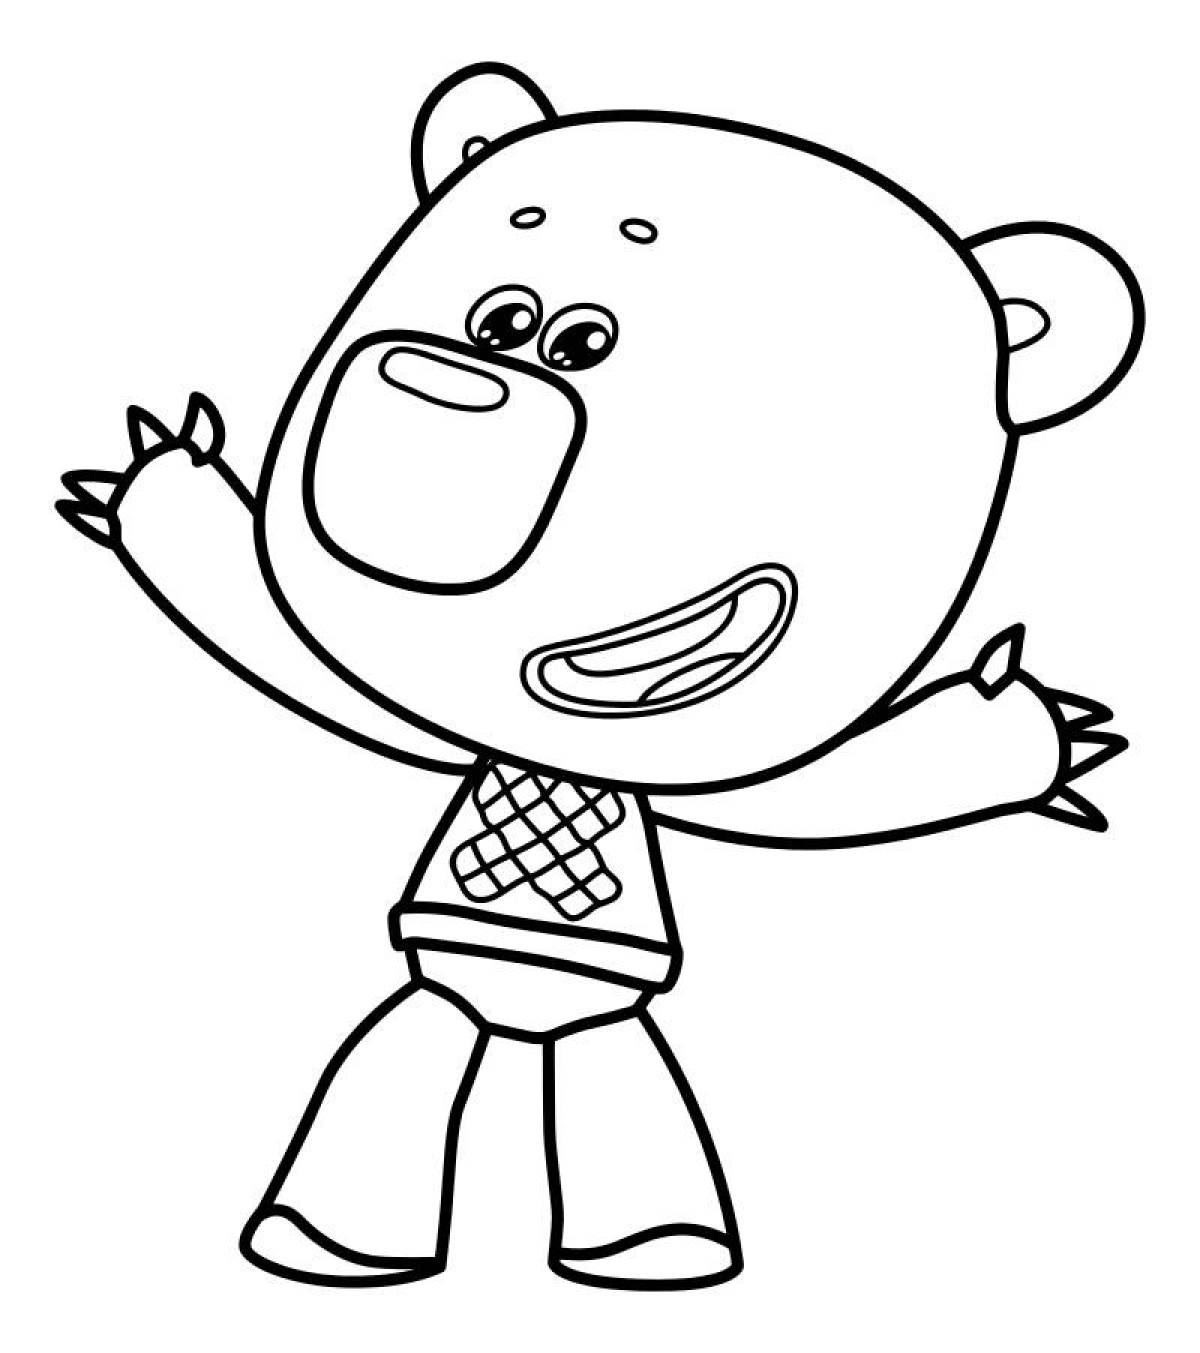 Busy bear coloring pages